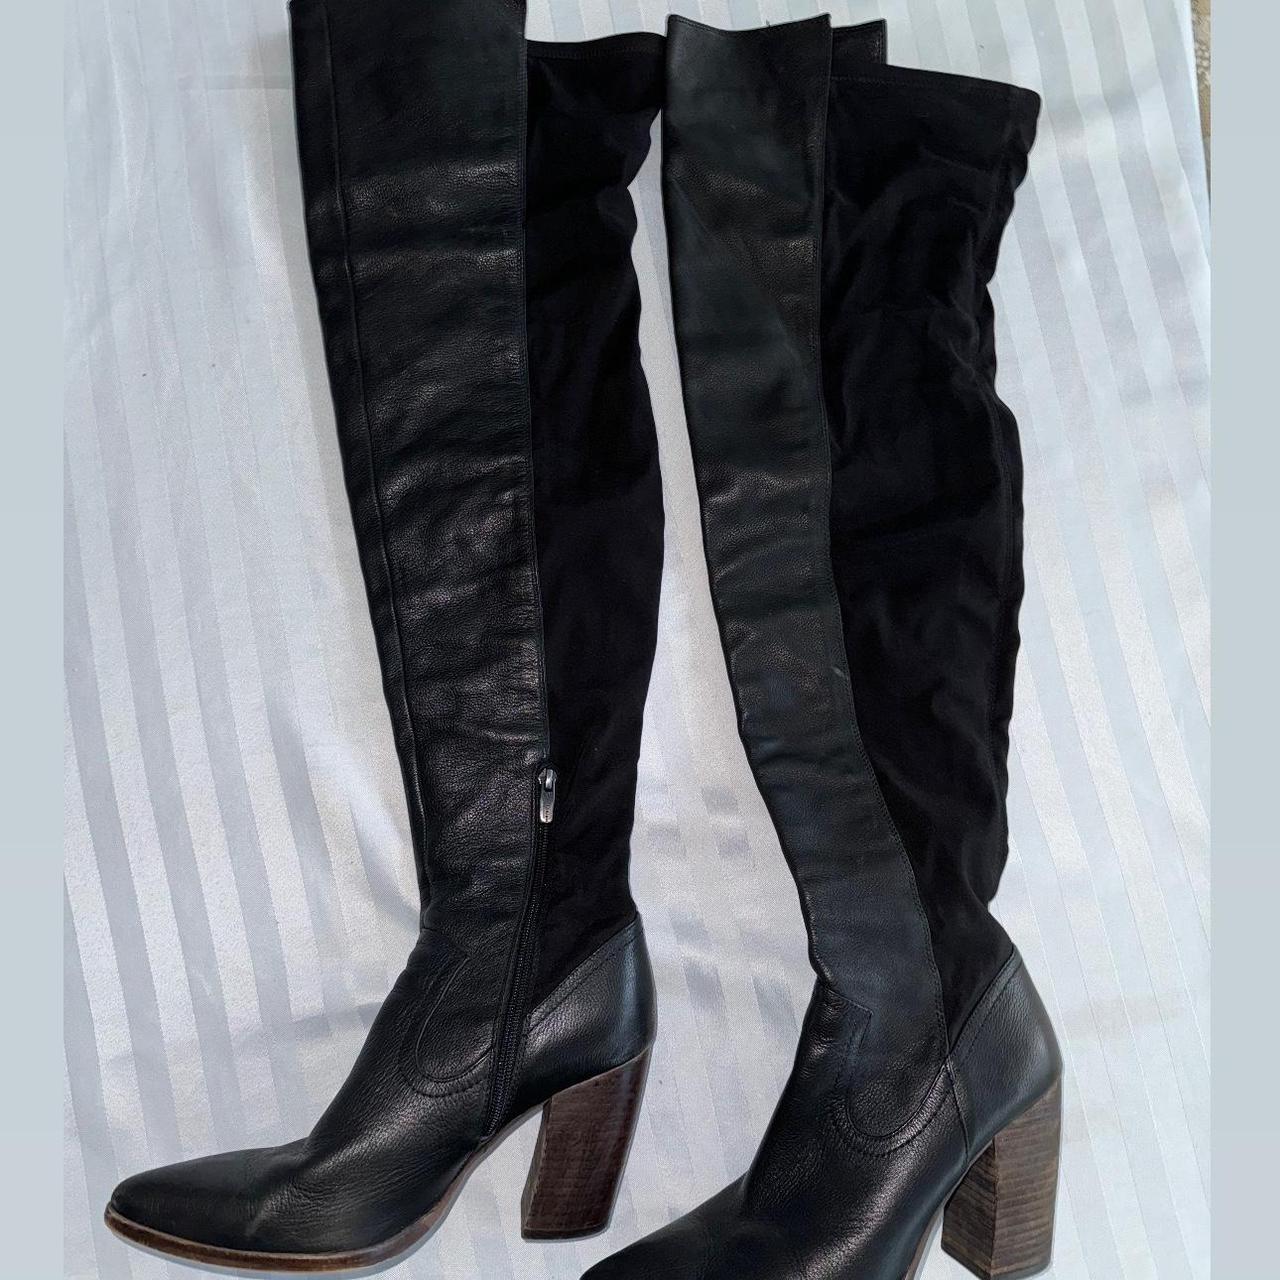 Vince Camuto Suede Black Knee High Boots Worn only once - Depop